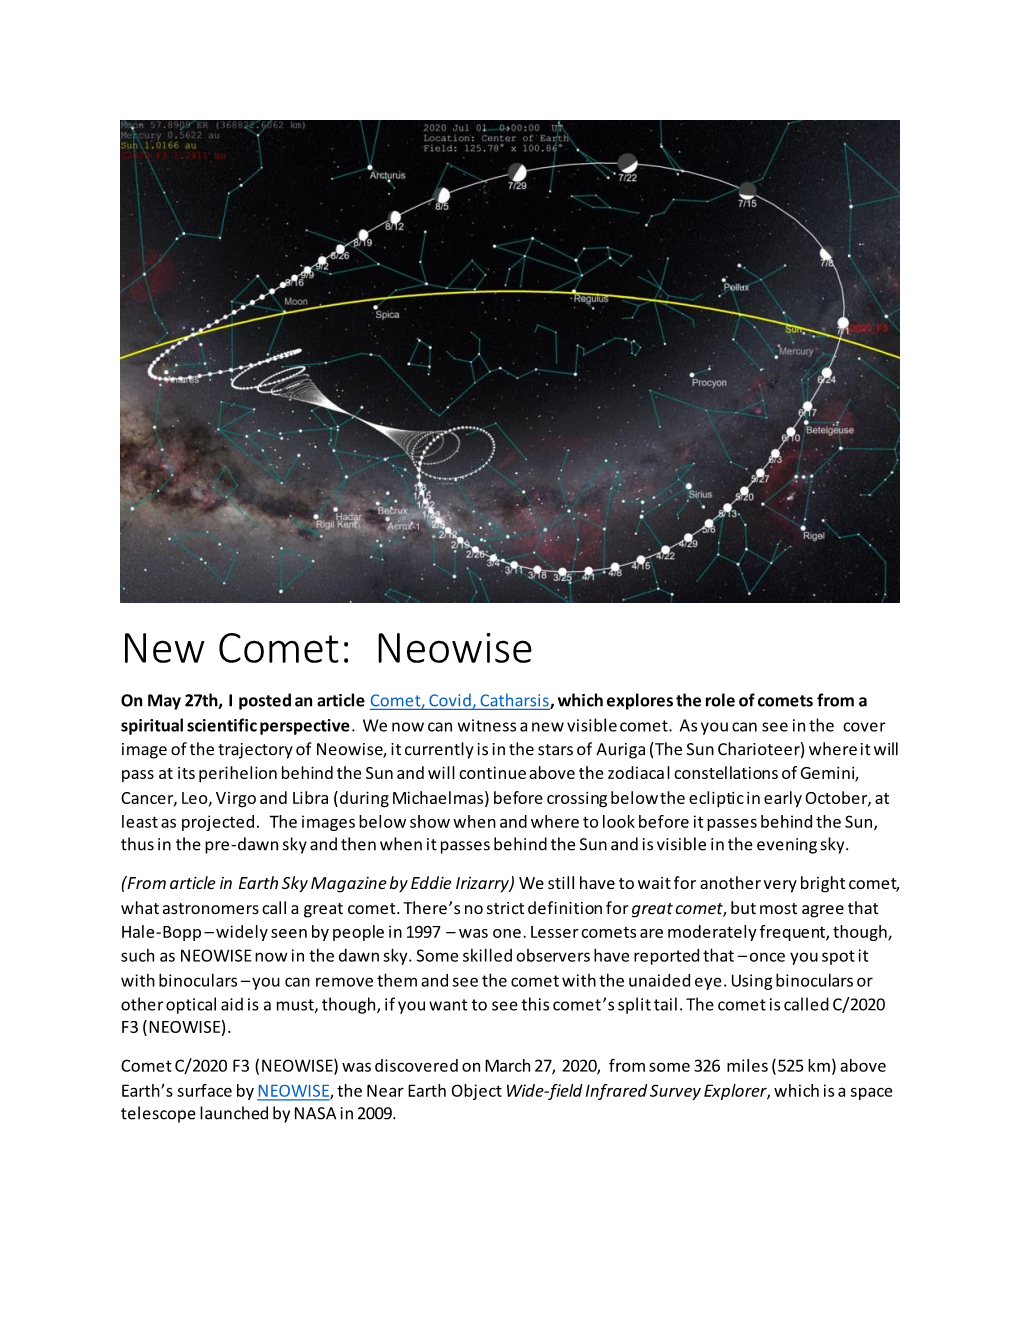 Neowise on May 27Th, I Posted an Article Comet, Covid, Catharsis, Which Explores the Role of Comets from a Spiritual Scientific Perspective